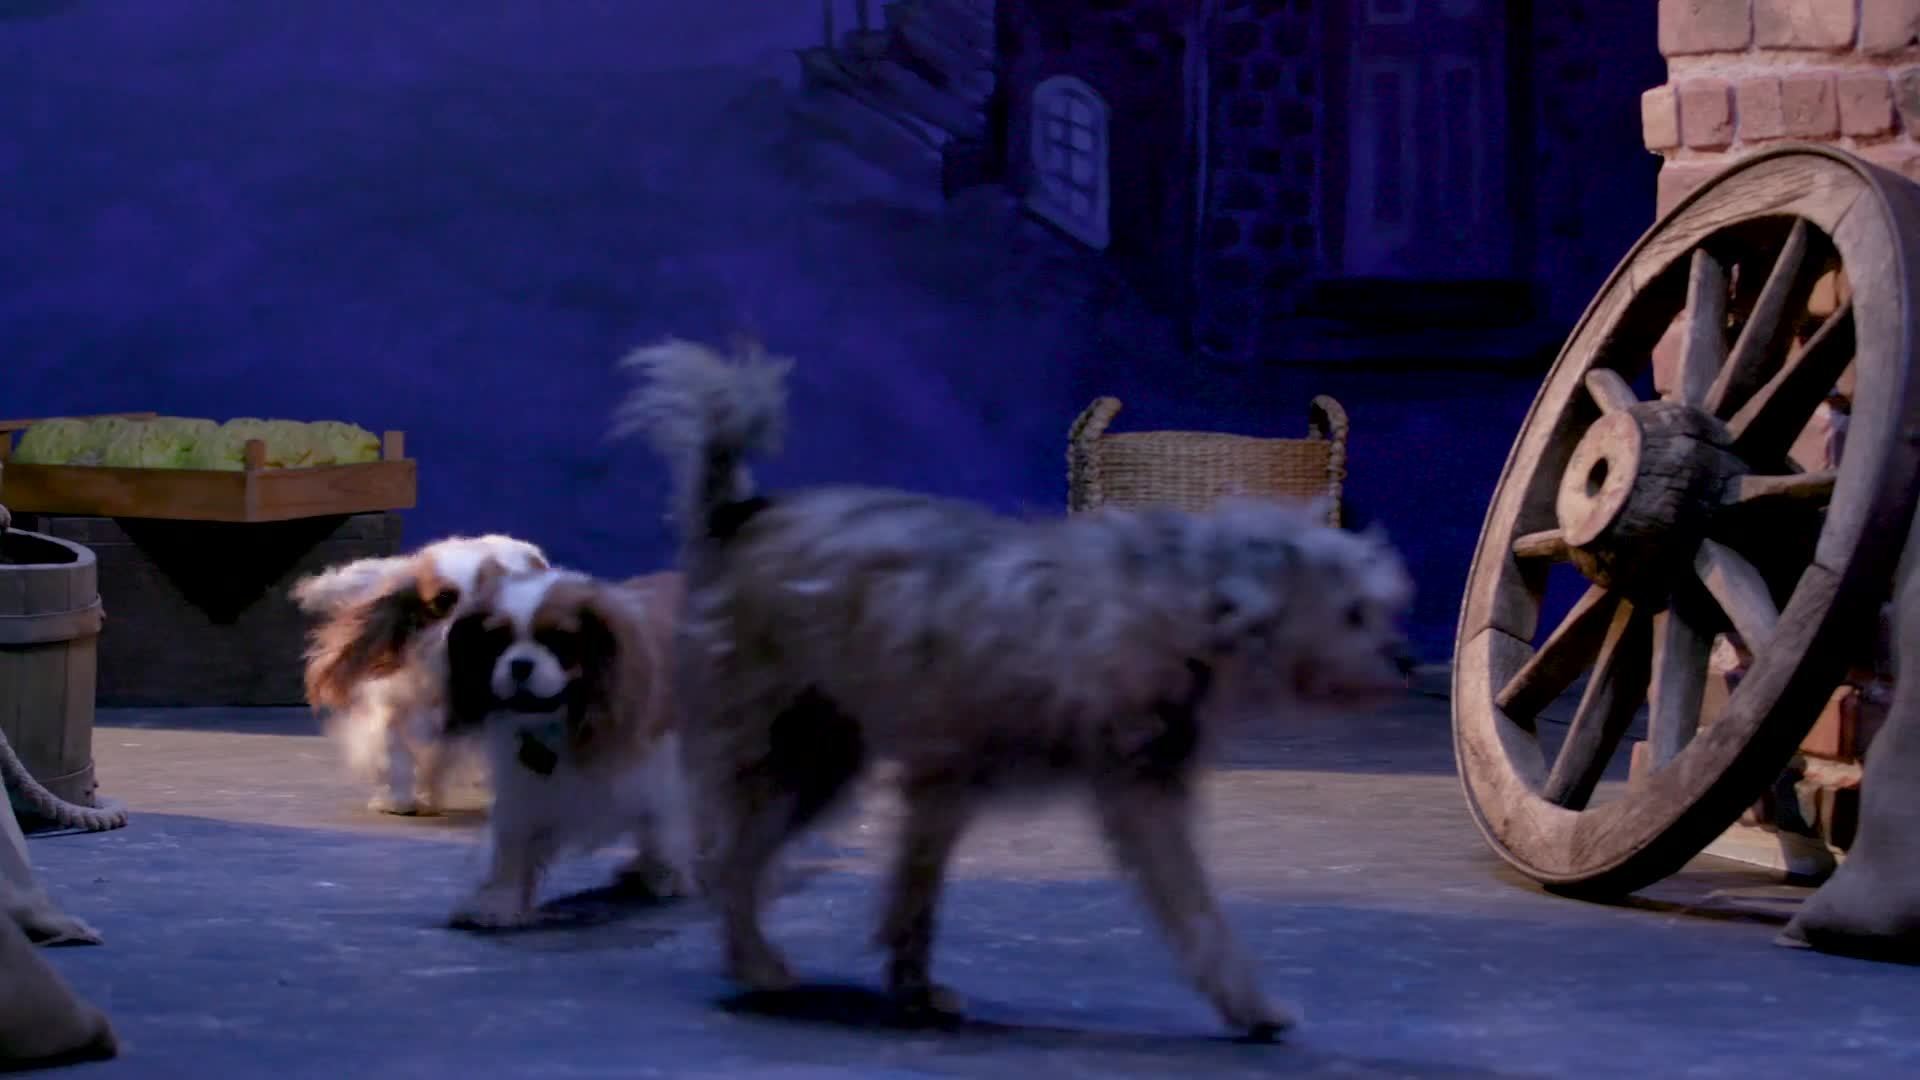 Livestream of Lady and the Tramp Puppies | Oh My Disney